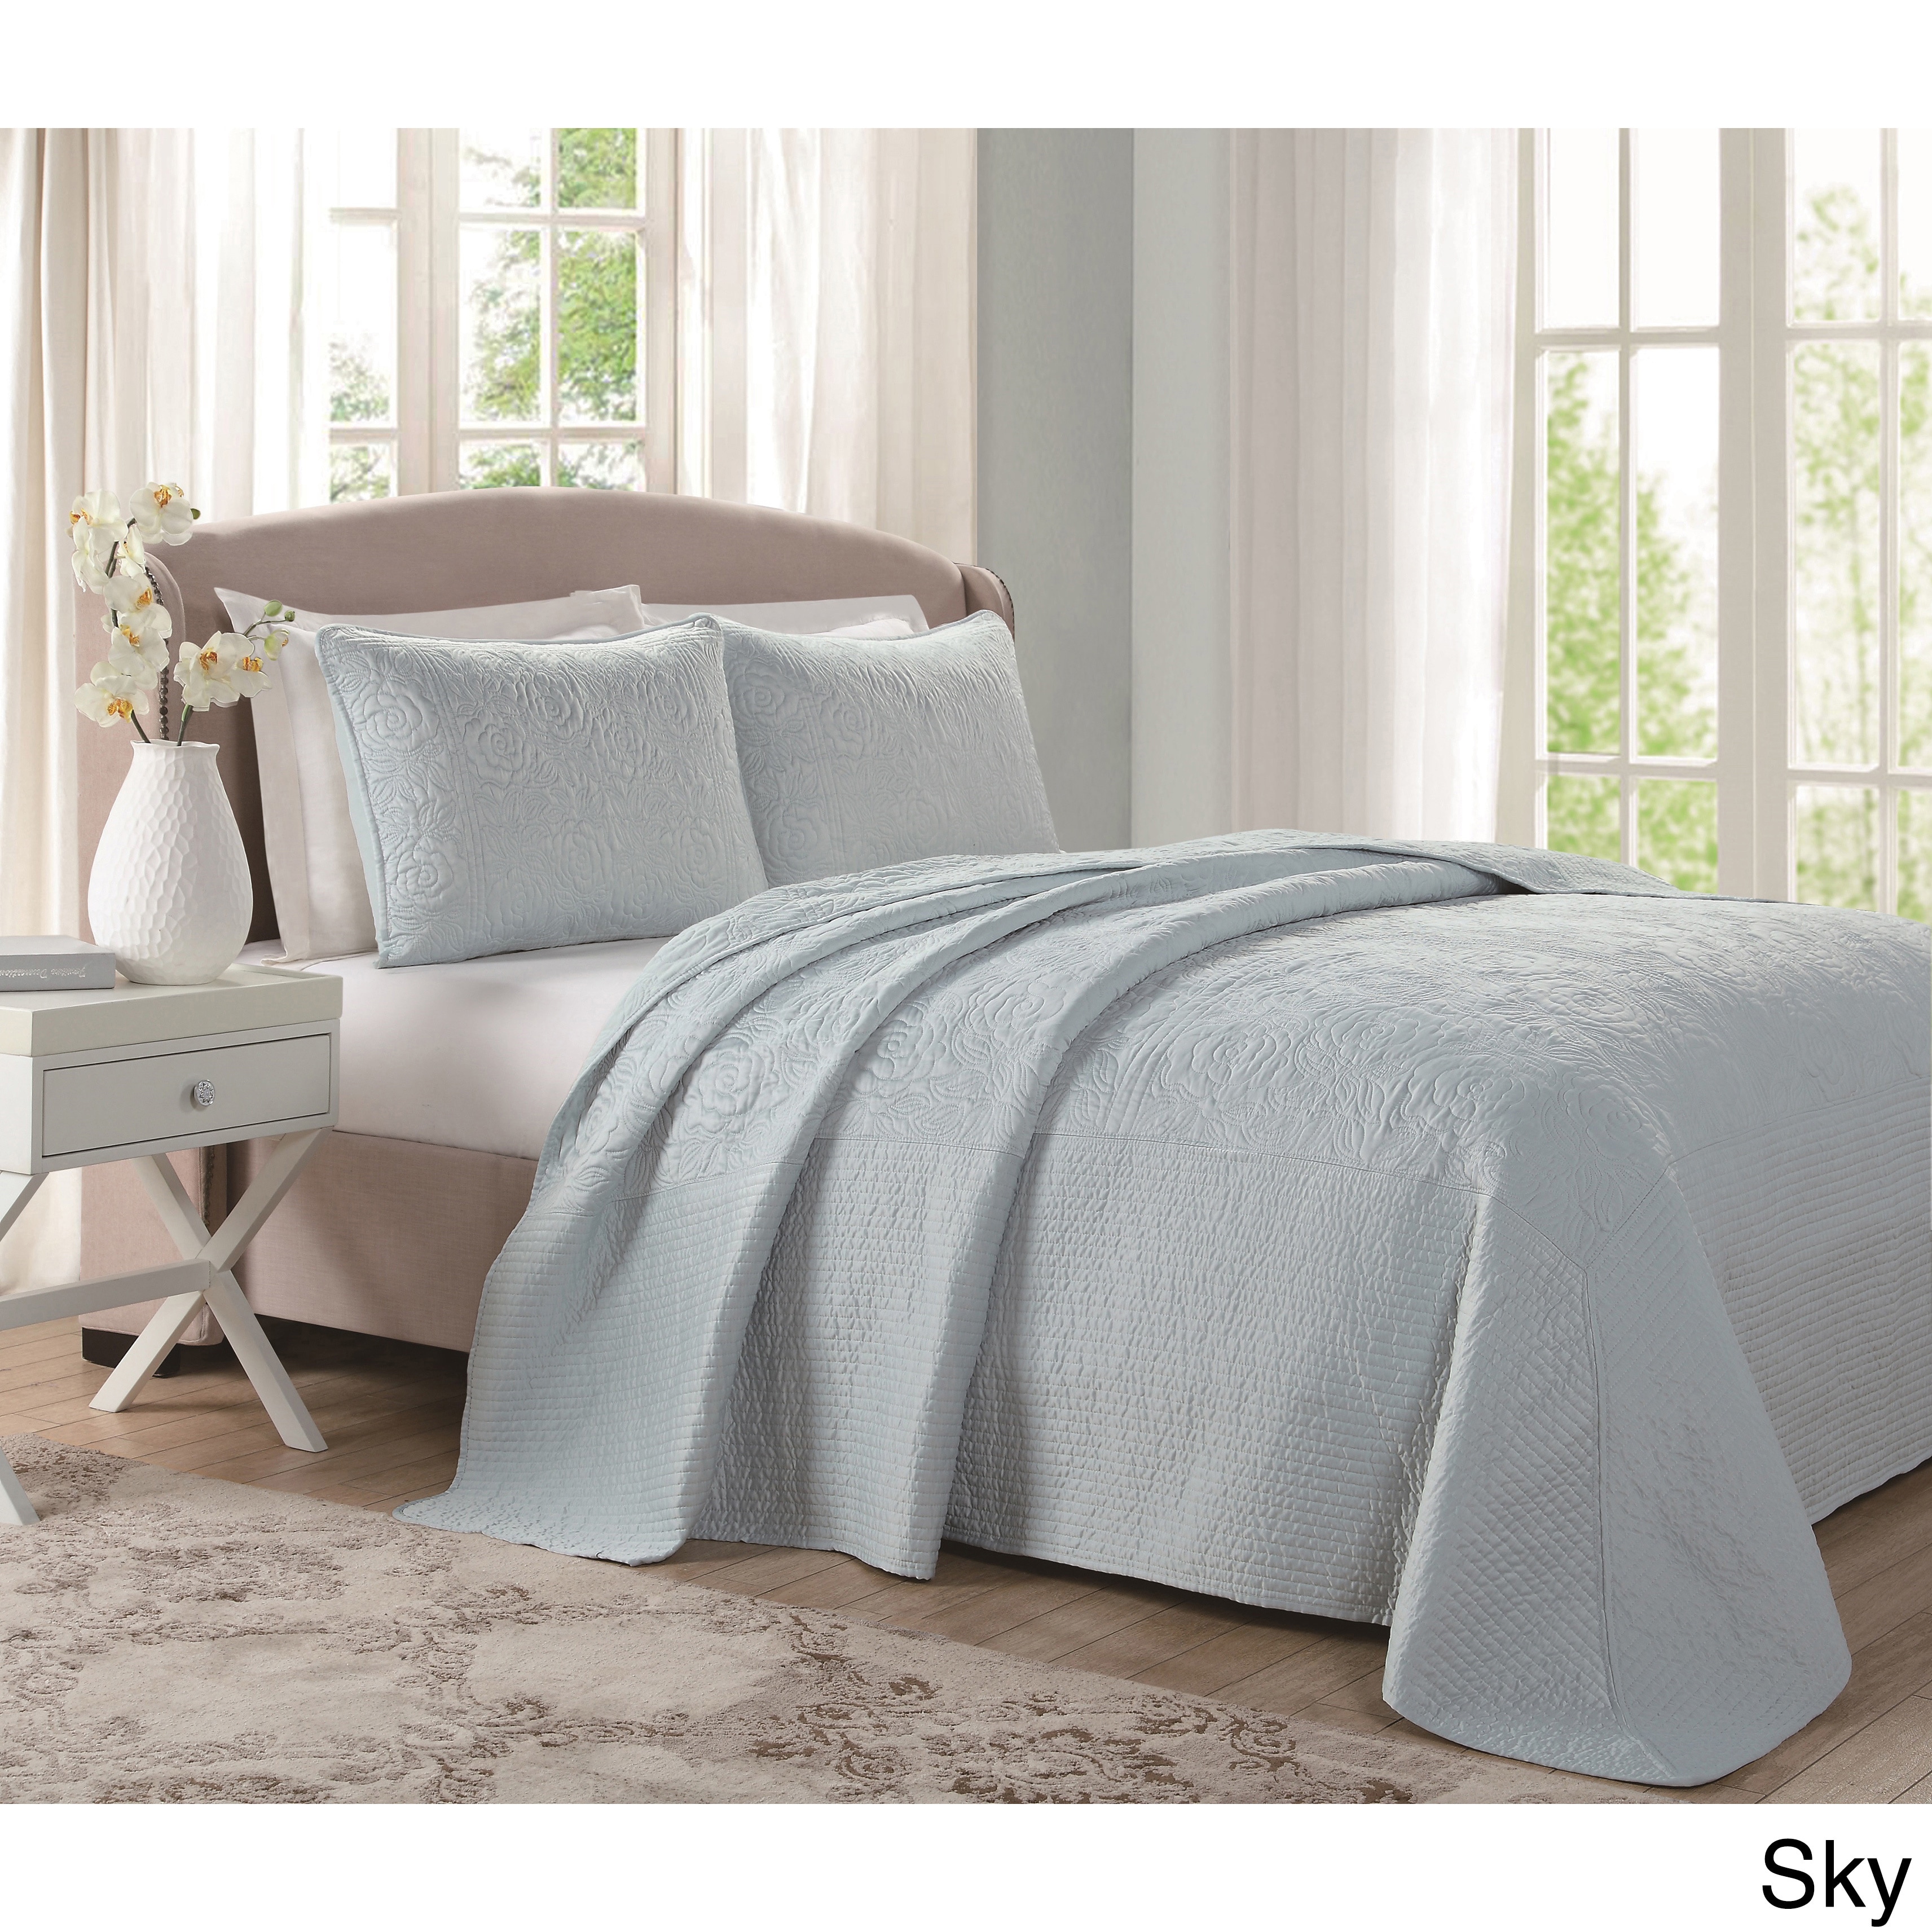 Shop Laura Ashley Silky Satin Quilted Bedspread Overstock 12032875